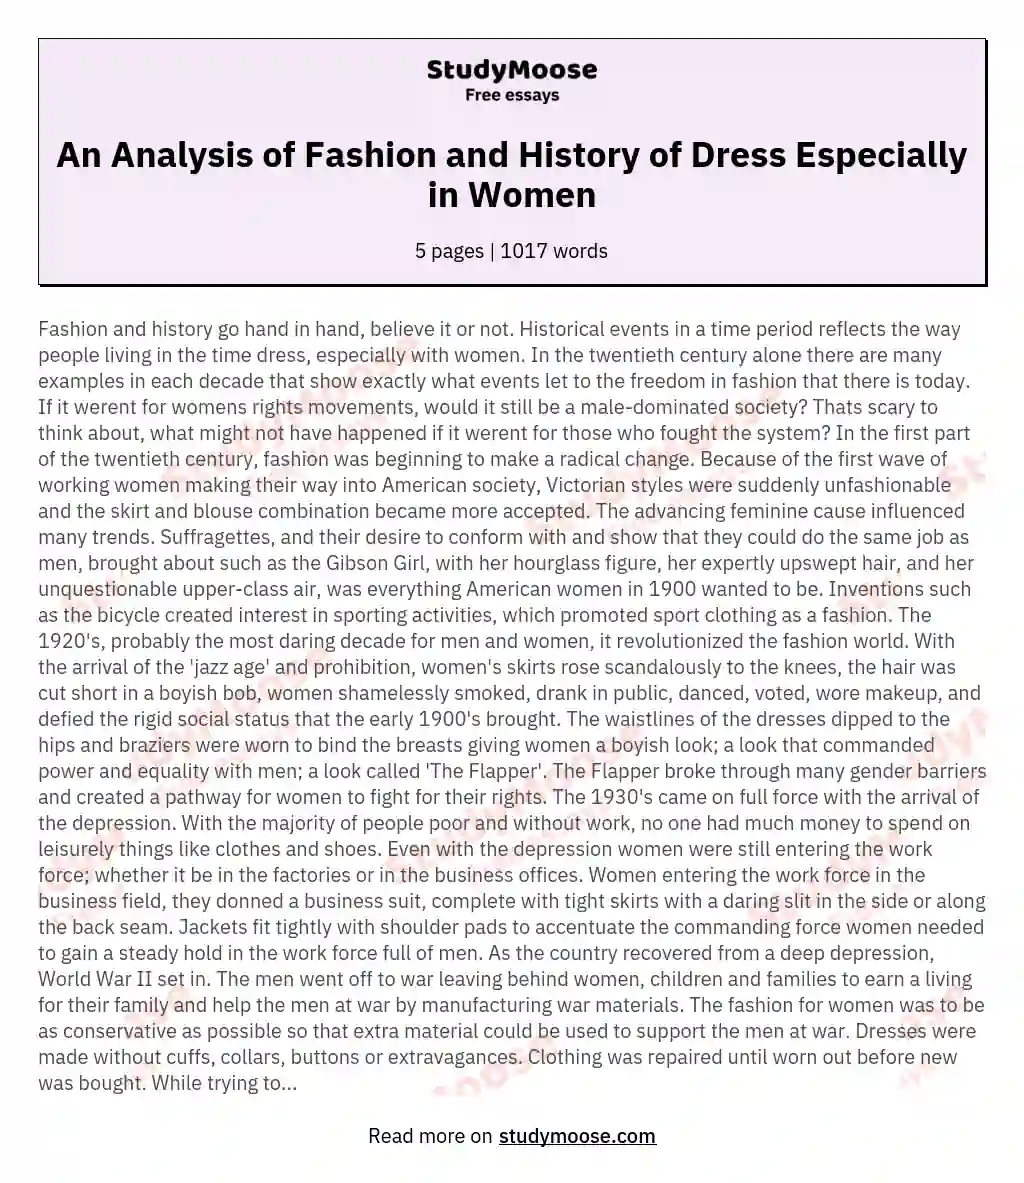 An Analysis of Fashion and History of Dress Especially in Women essay